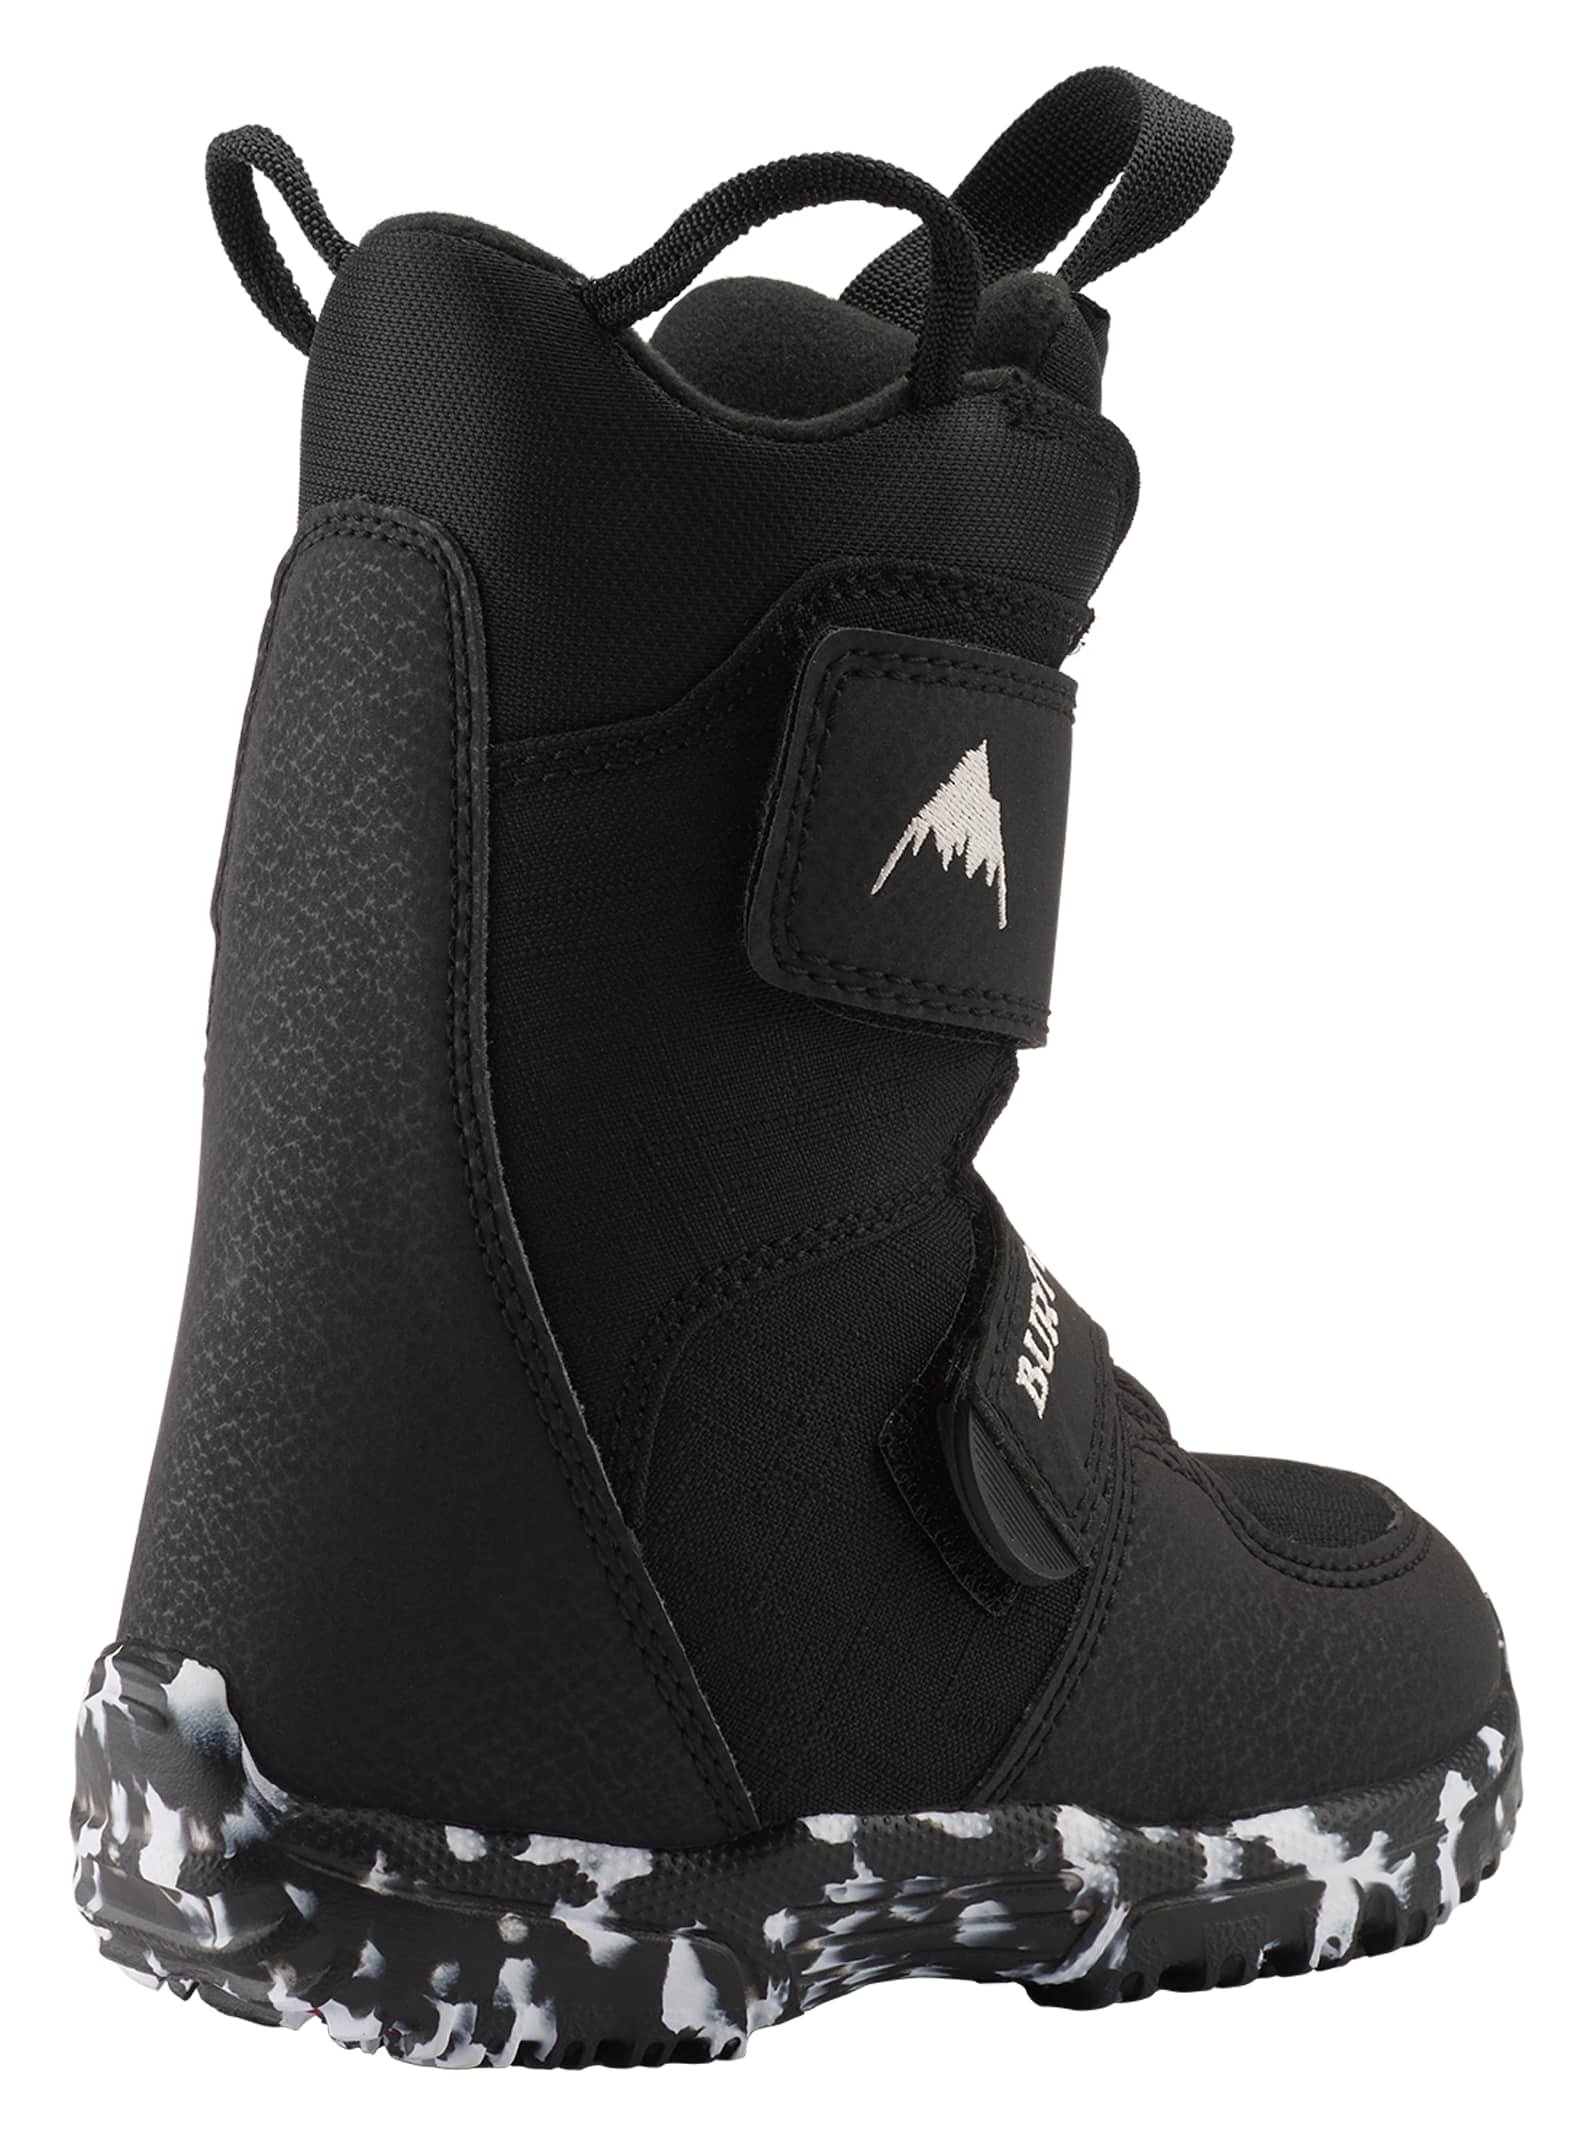 Youth Snowboard Boot Size Chart